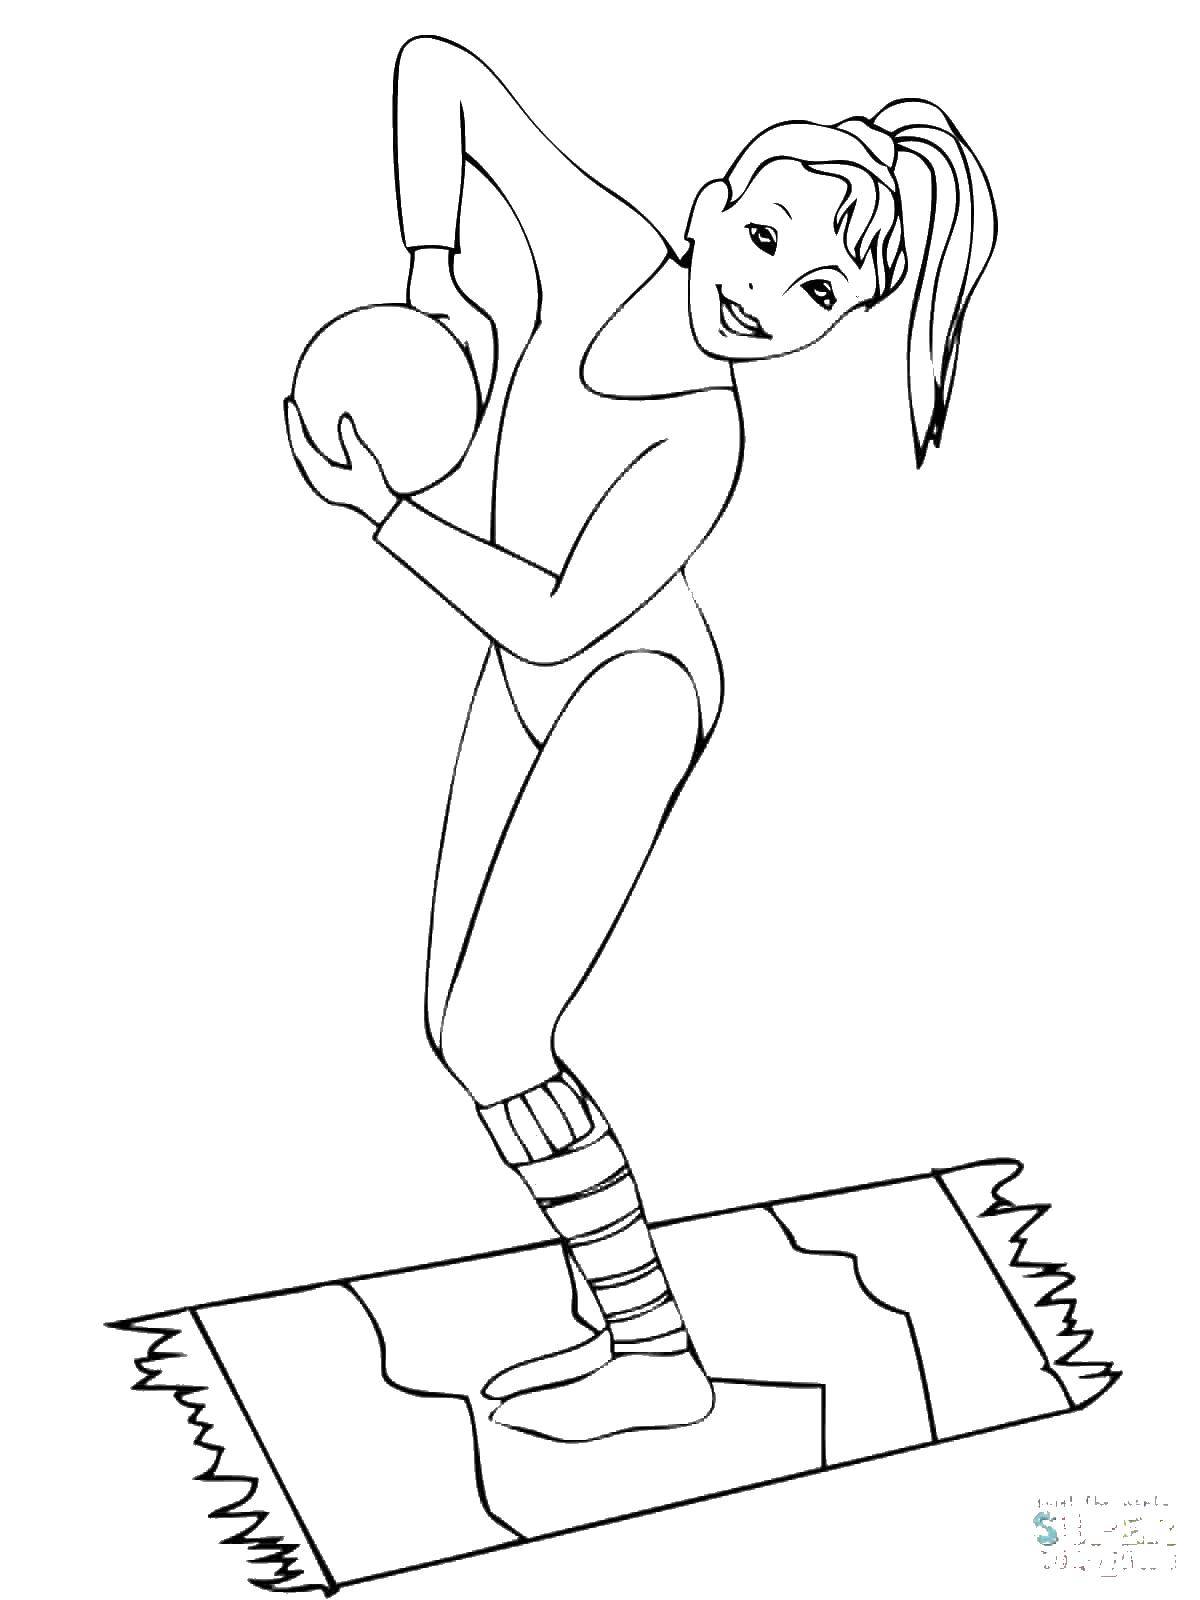 Coloring The gymnast and the ball. Category gymnastics. Tags:  gymnast, ball.